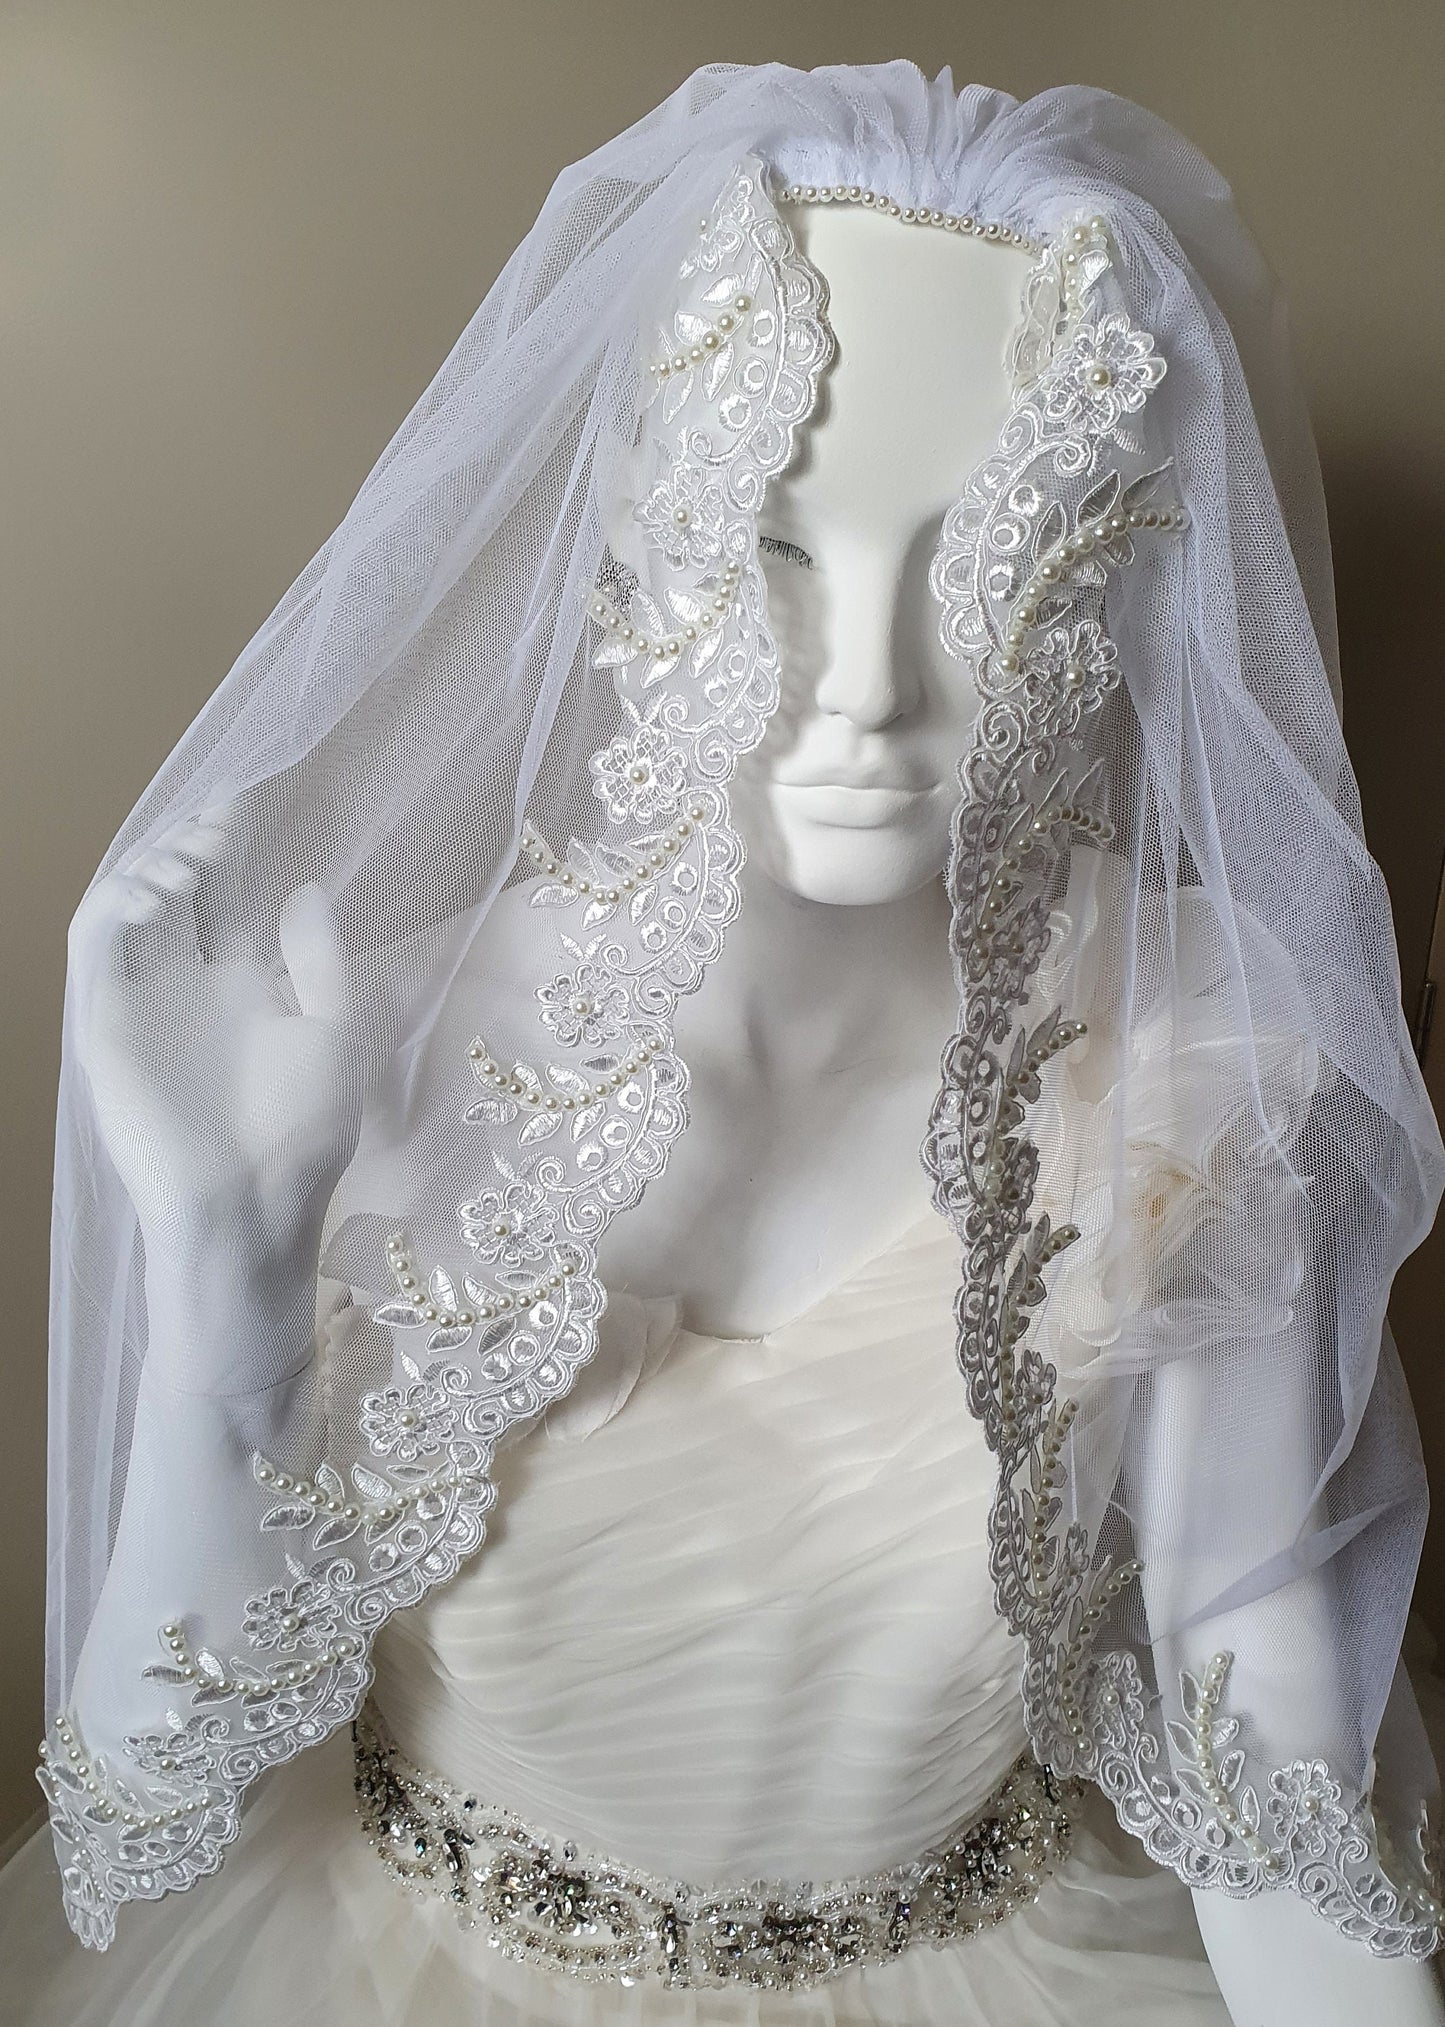 Bridal veil with lace, handmade with pearls, plastic comb with pearls, bridal veil, round veil, church shutter, special wedding